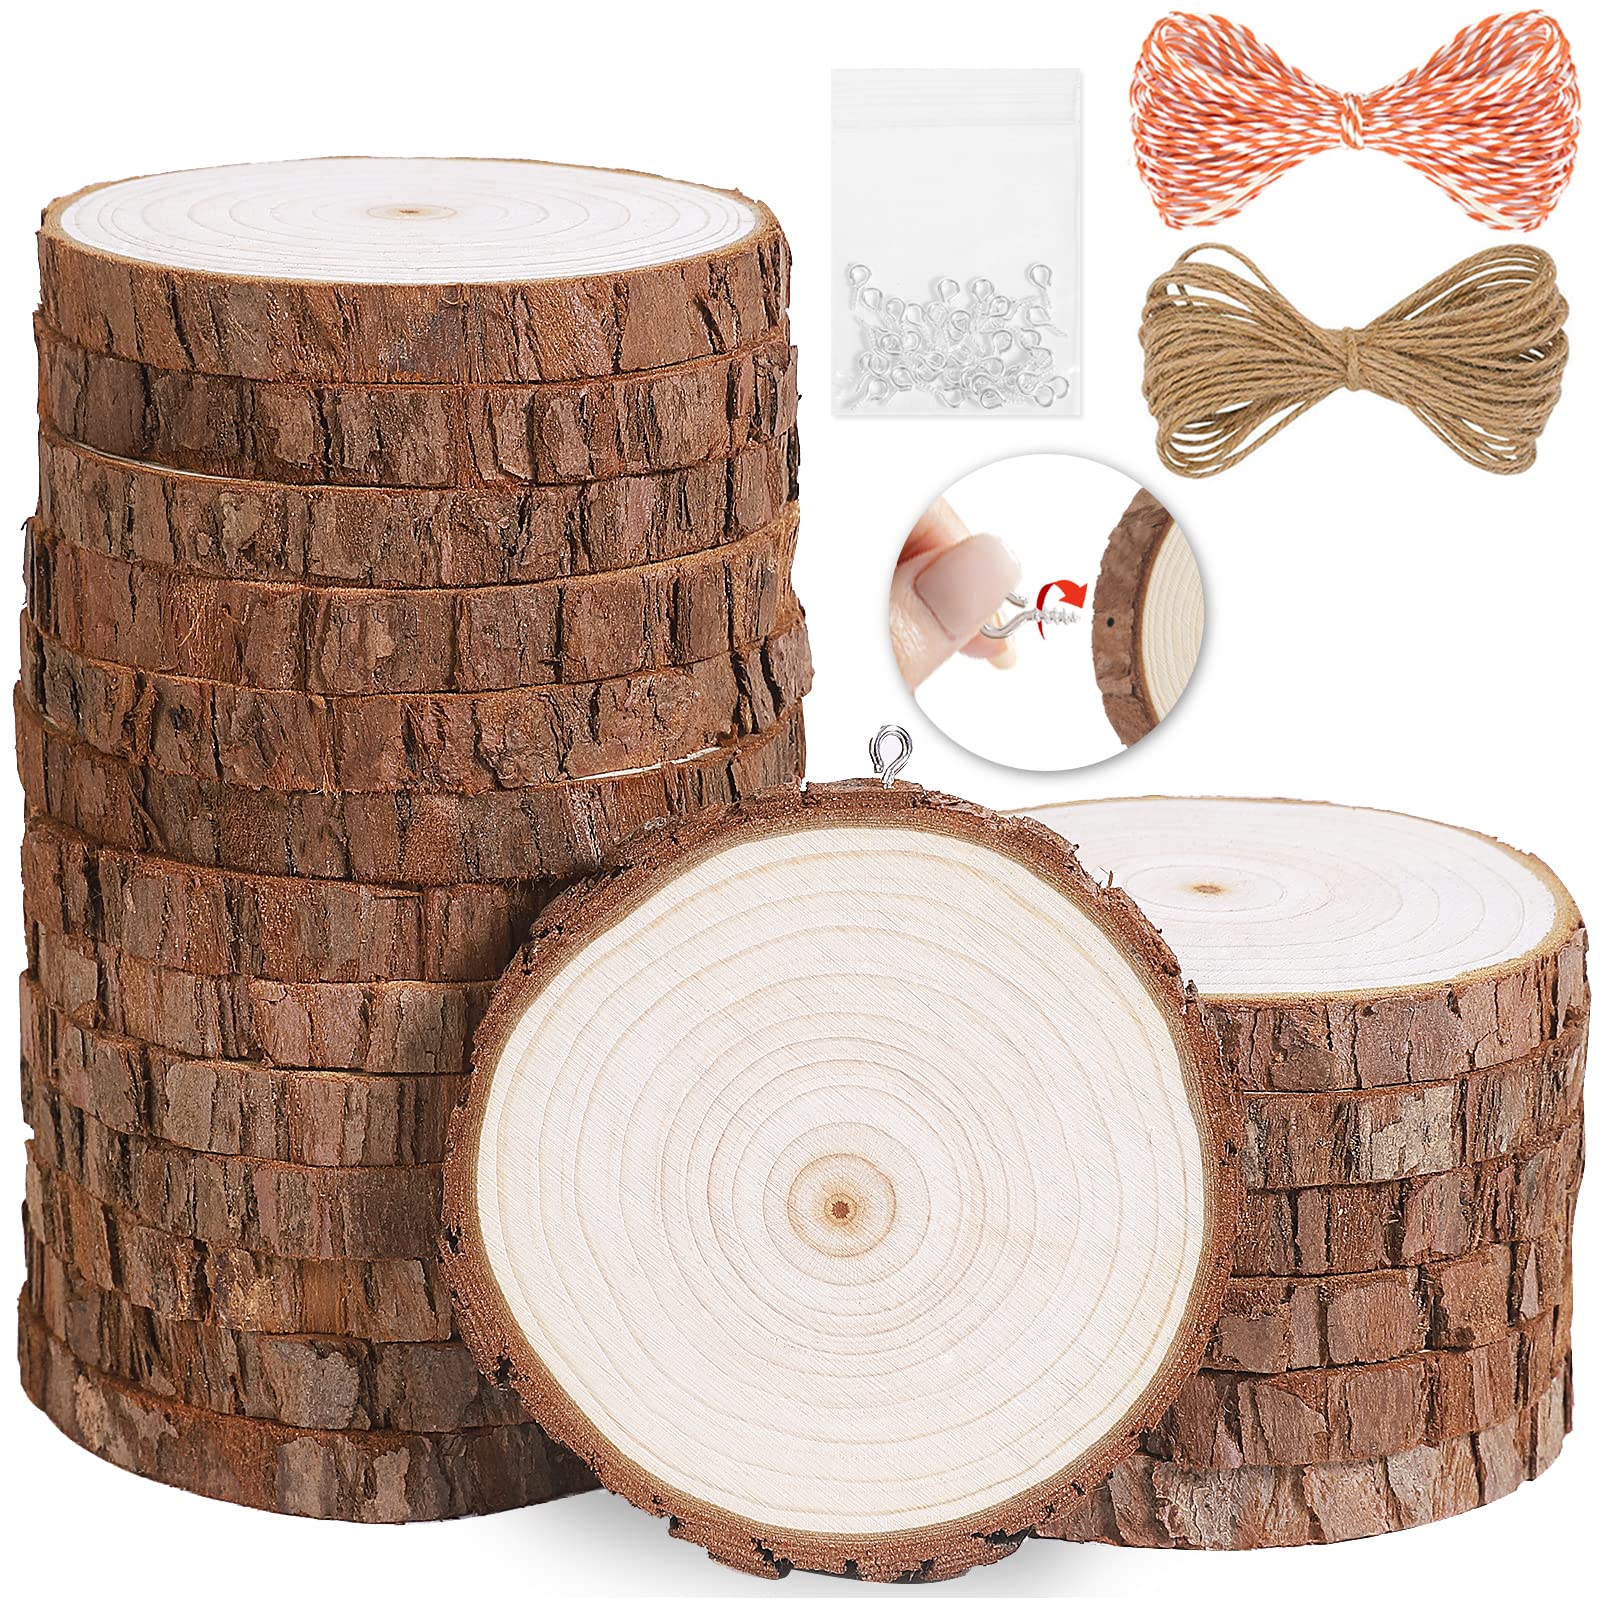 LRAERZ Natural Wood Slices 20Pcs 3.5-4.0 in Unfinished Wood Kit with Screw  Eye Rings, Complete Wood Coaster, Wooden Circles for Crafts